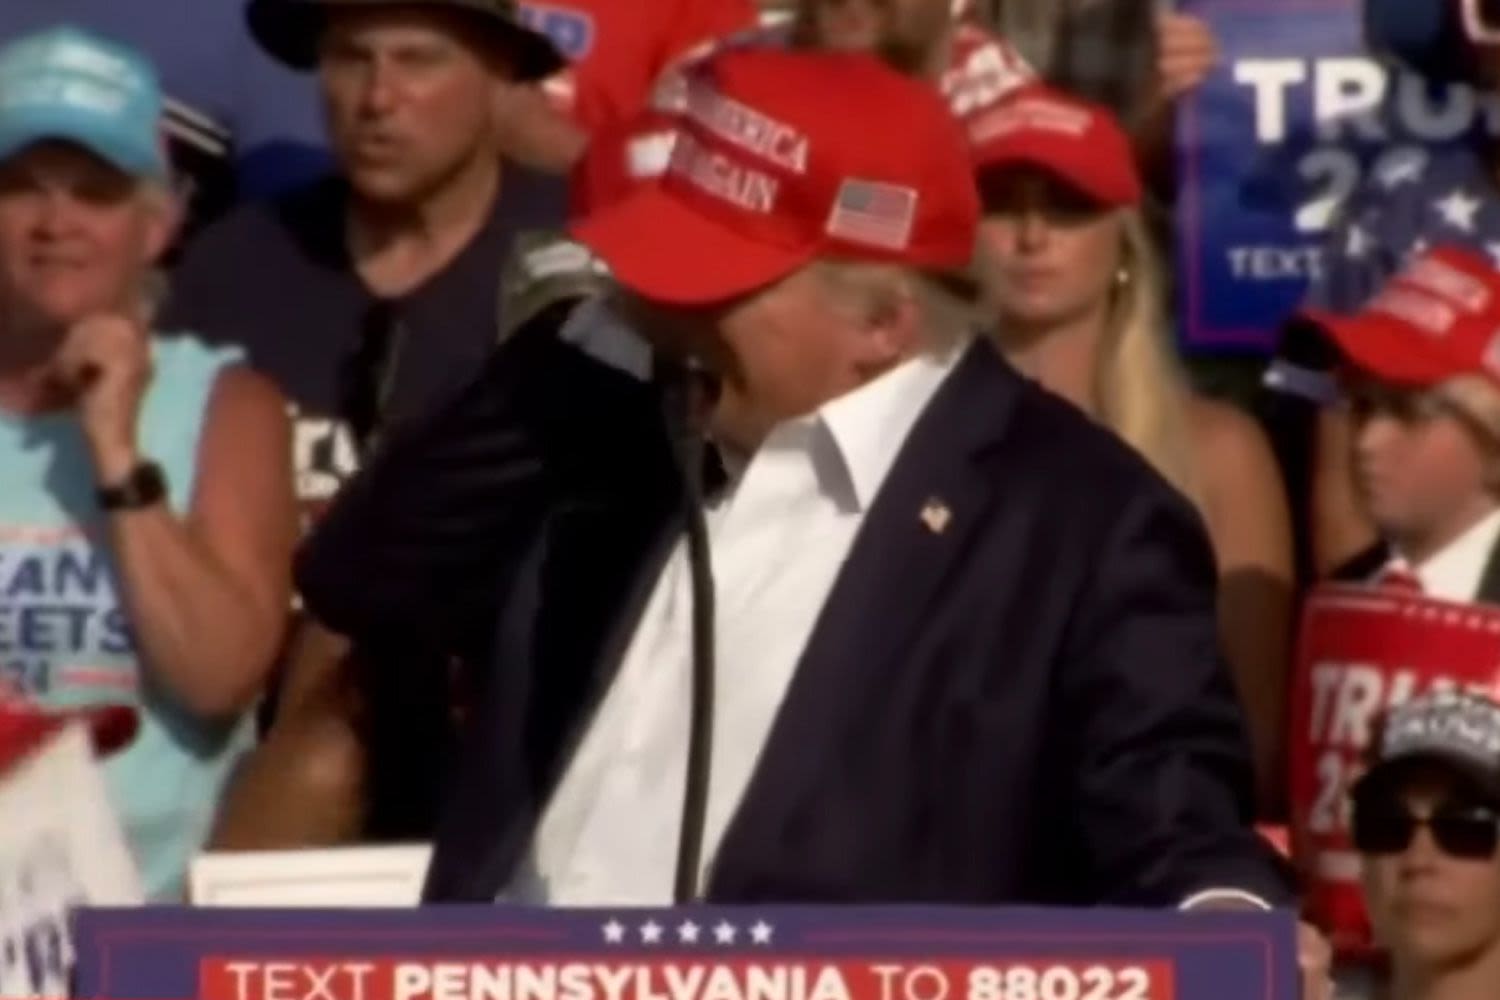 Donald Trump safe, 2 dead after shooting at campaign rally in Pennsylvania